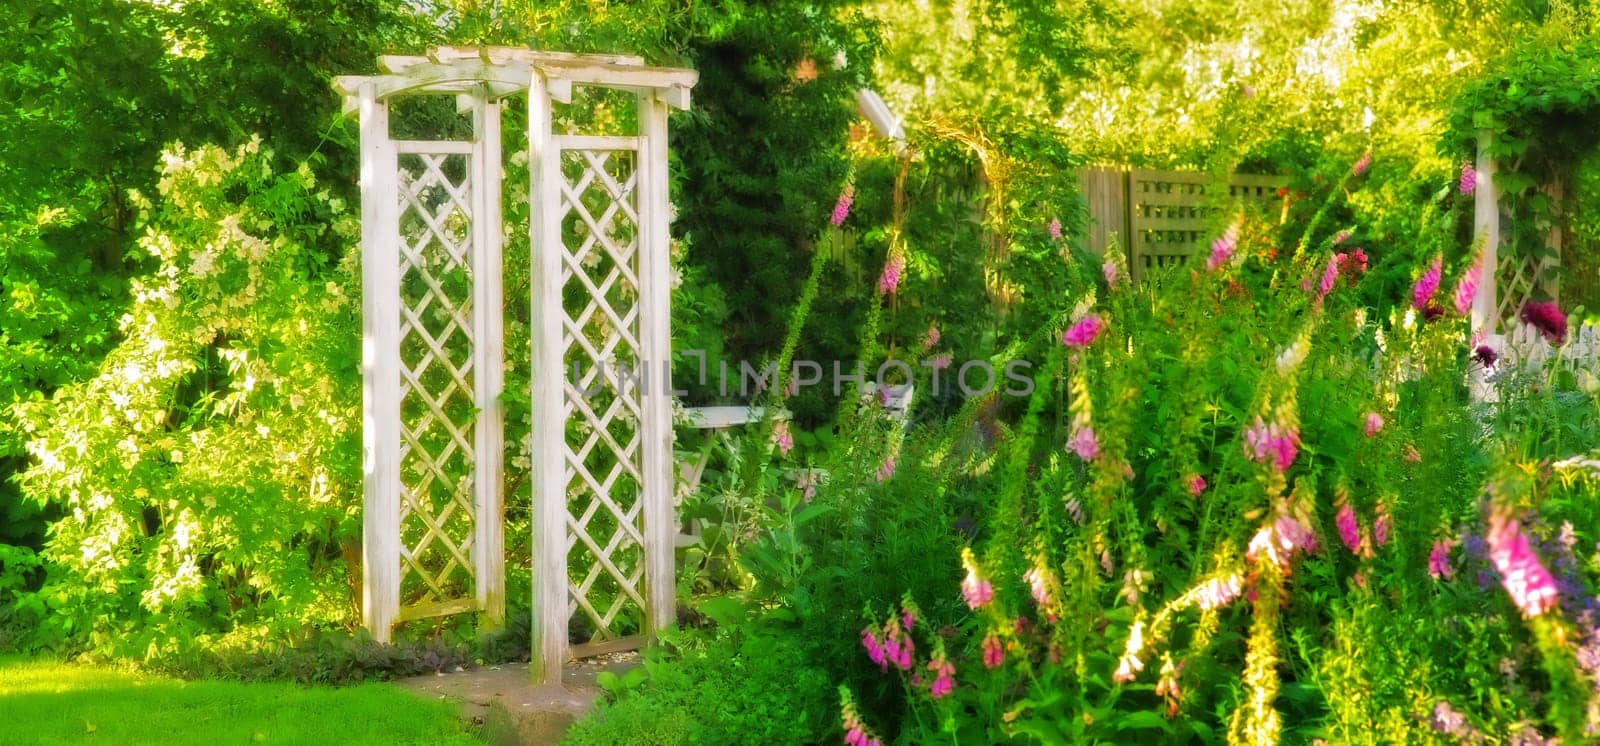 Flower, garden and arch with natural greenery in nature for venue, floral blossoms or outdoor bloom. Plants, wooden structure or empty backyard with growth, wooden frame or design for exterior decor by YuriArcurs